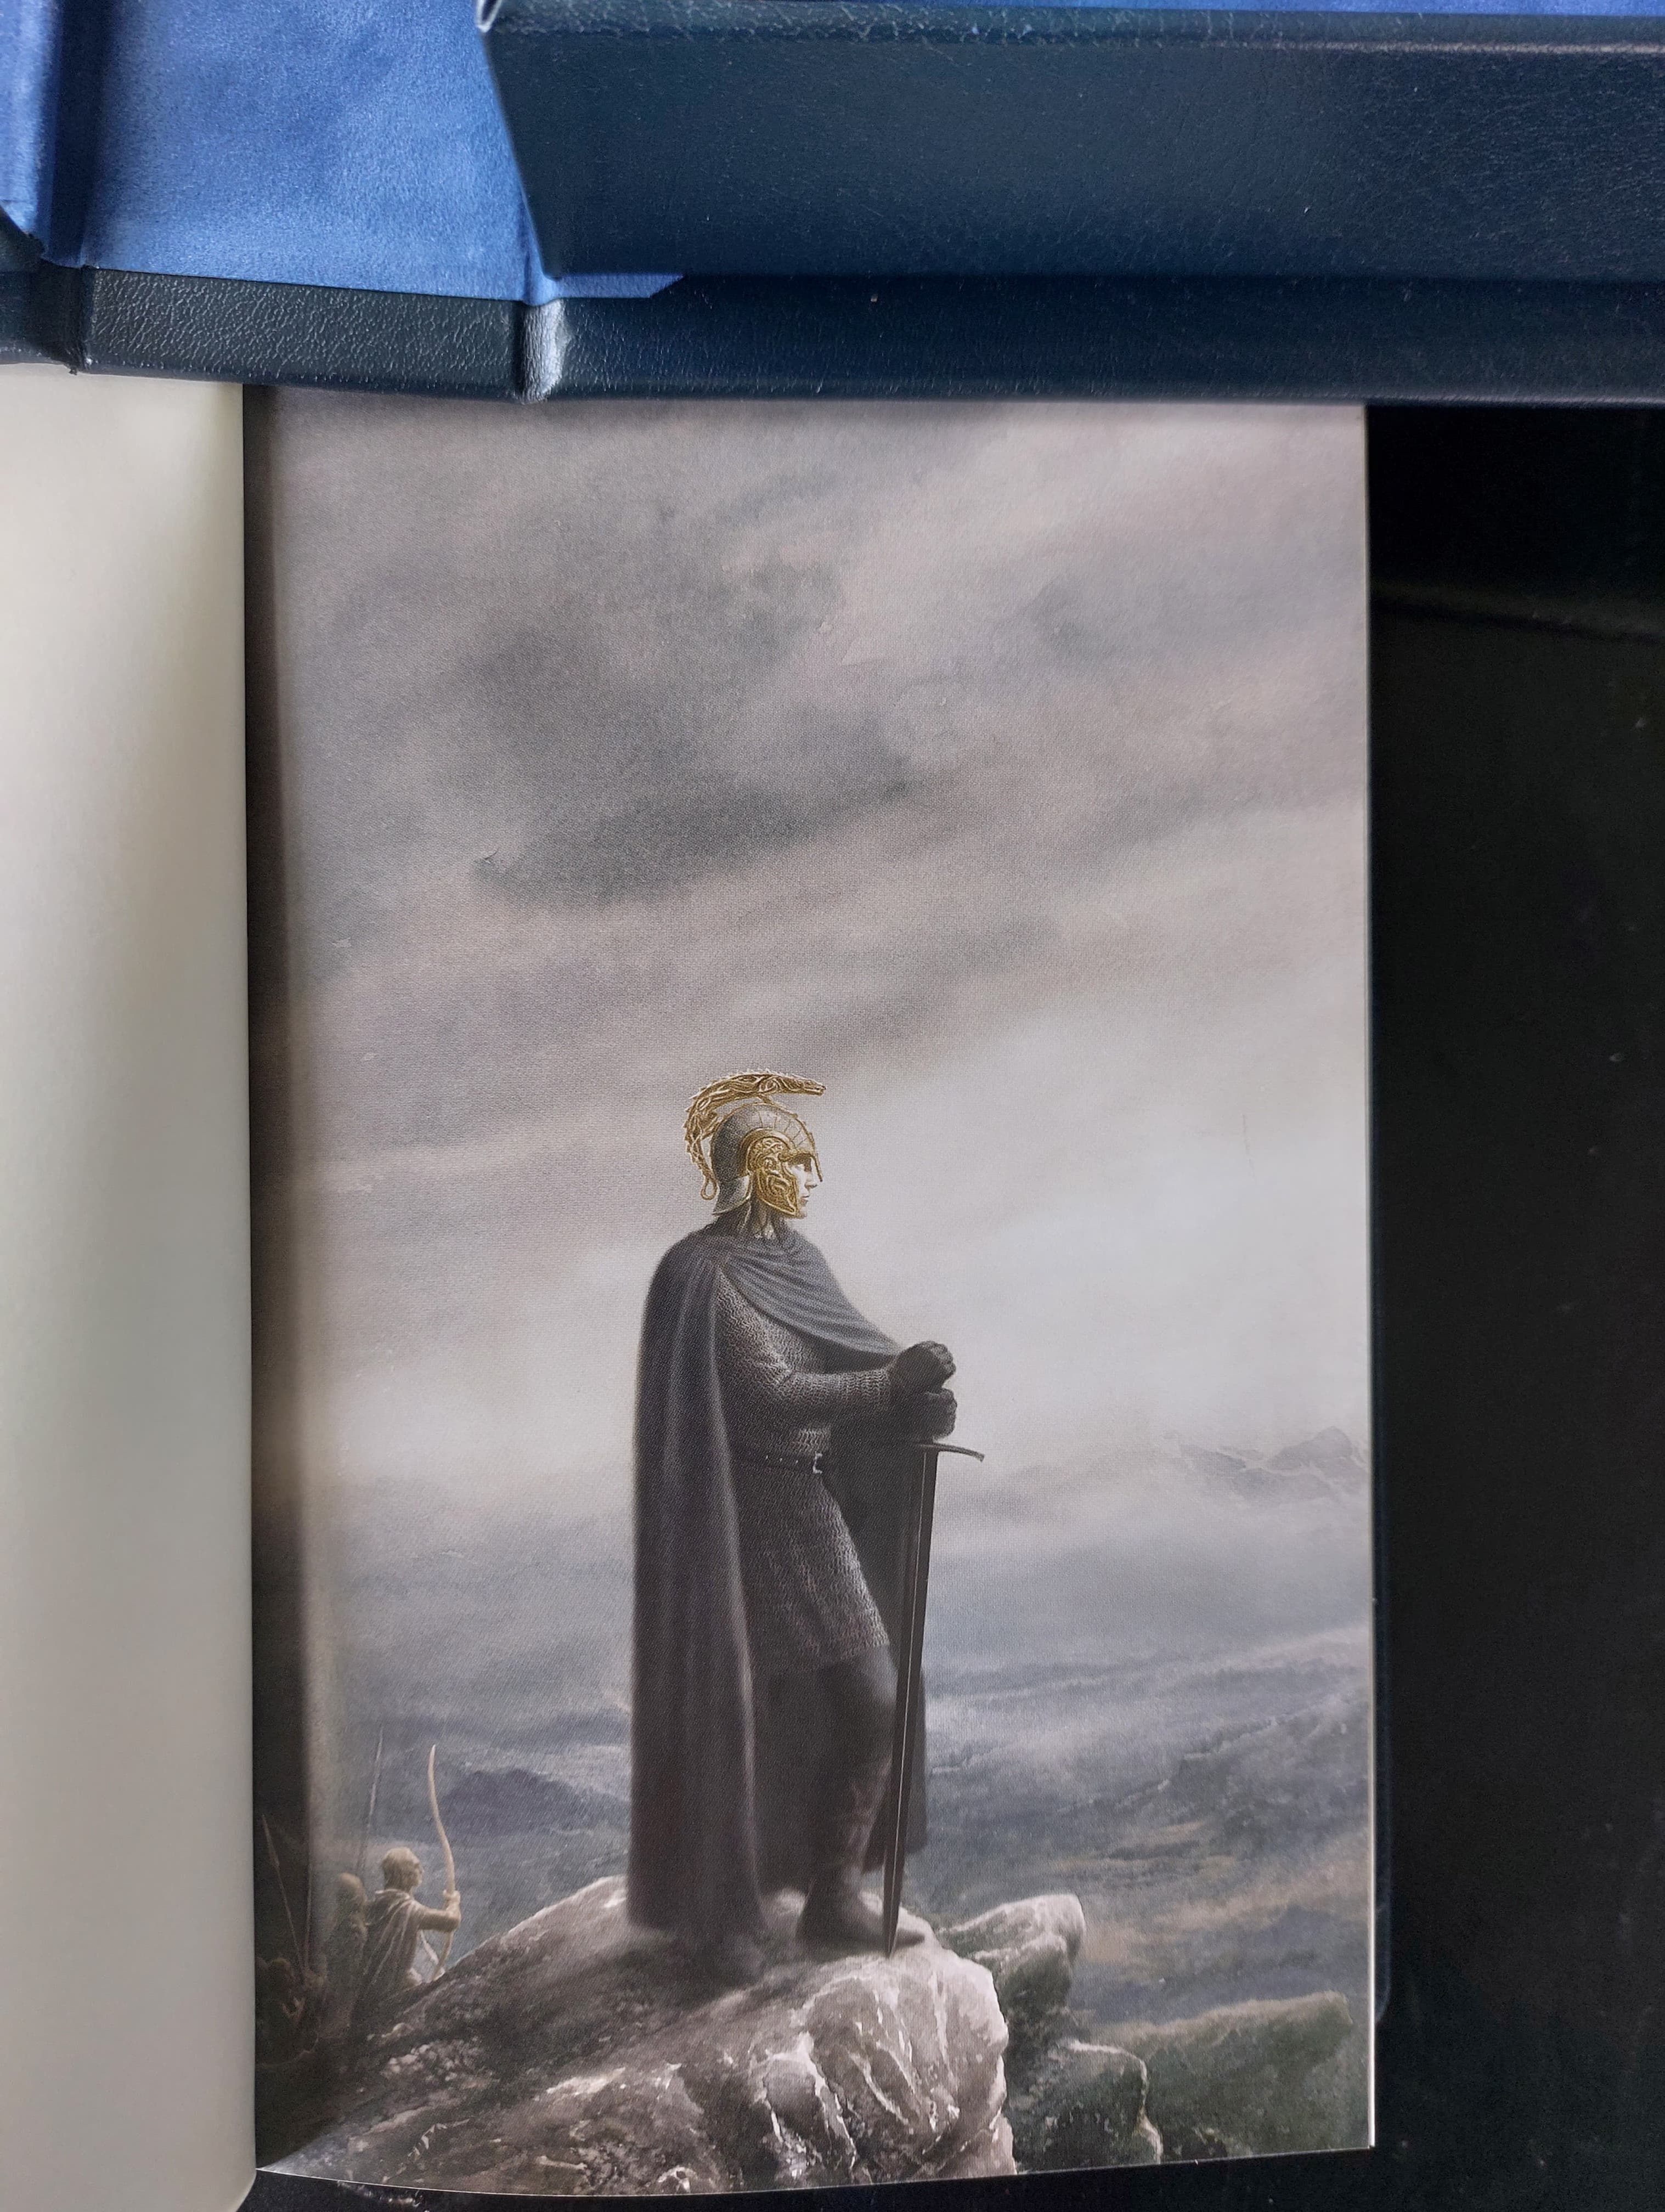 
The Children of Hurin, Signed Limited Numbered Super Deluxe Edition 5